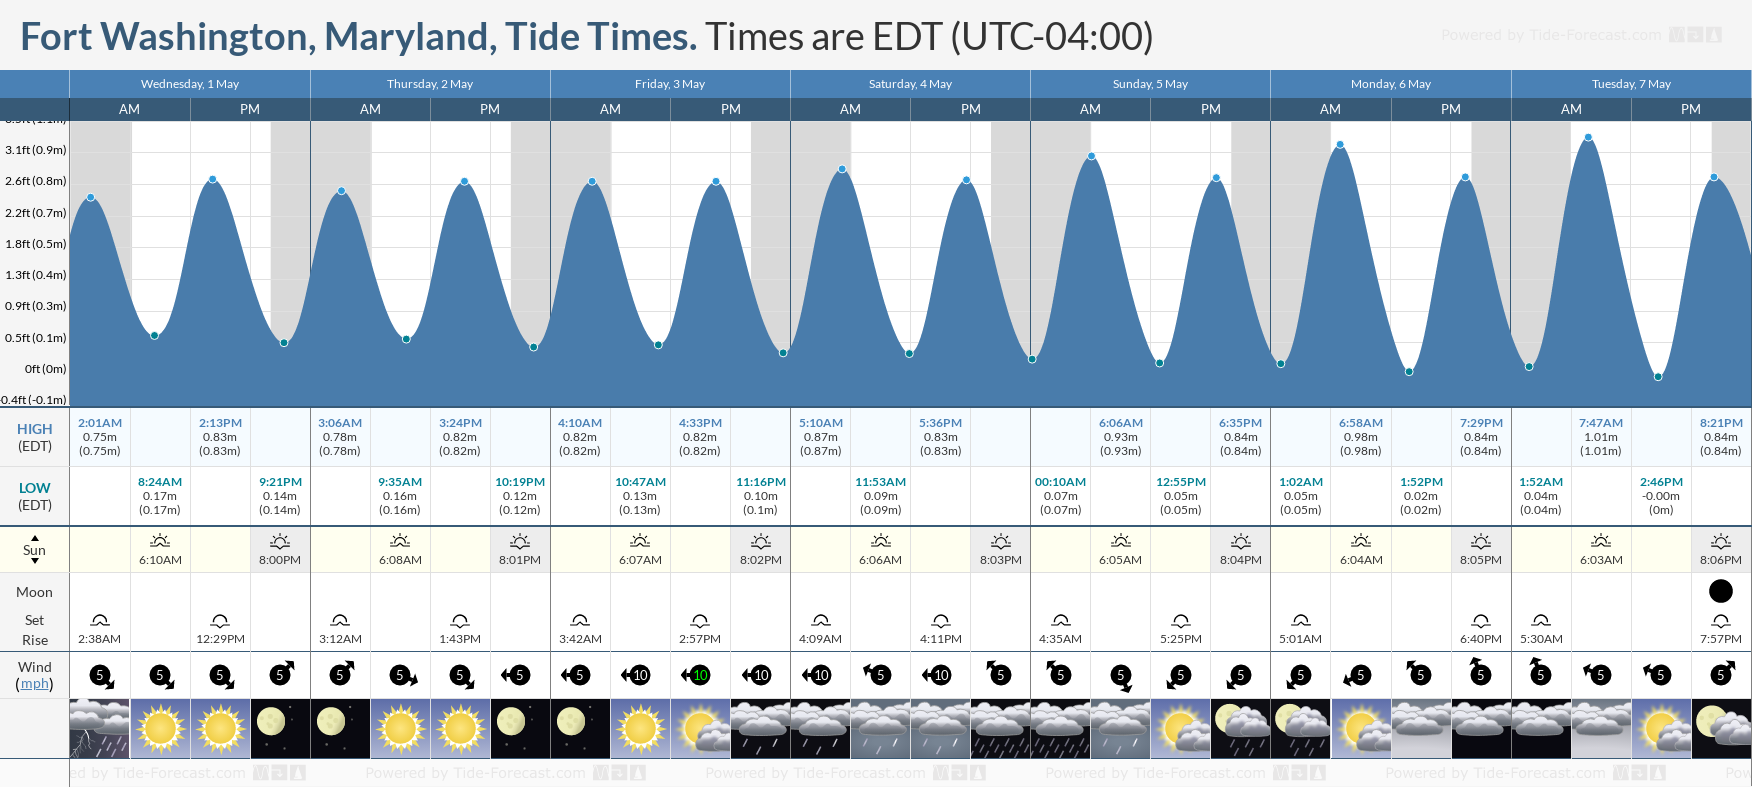 Fort Washington, Maryland Tide Chart including high and low tide tide times for the next 7 days